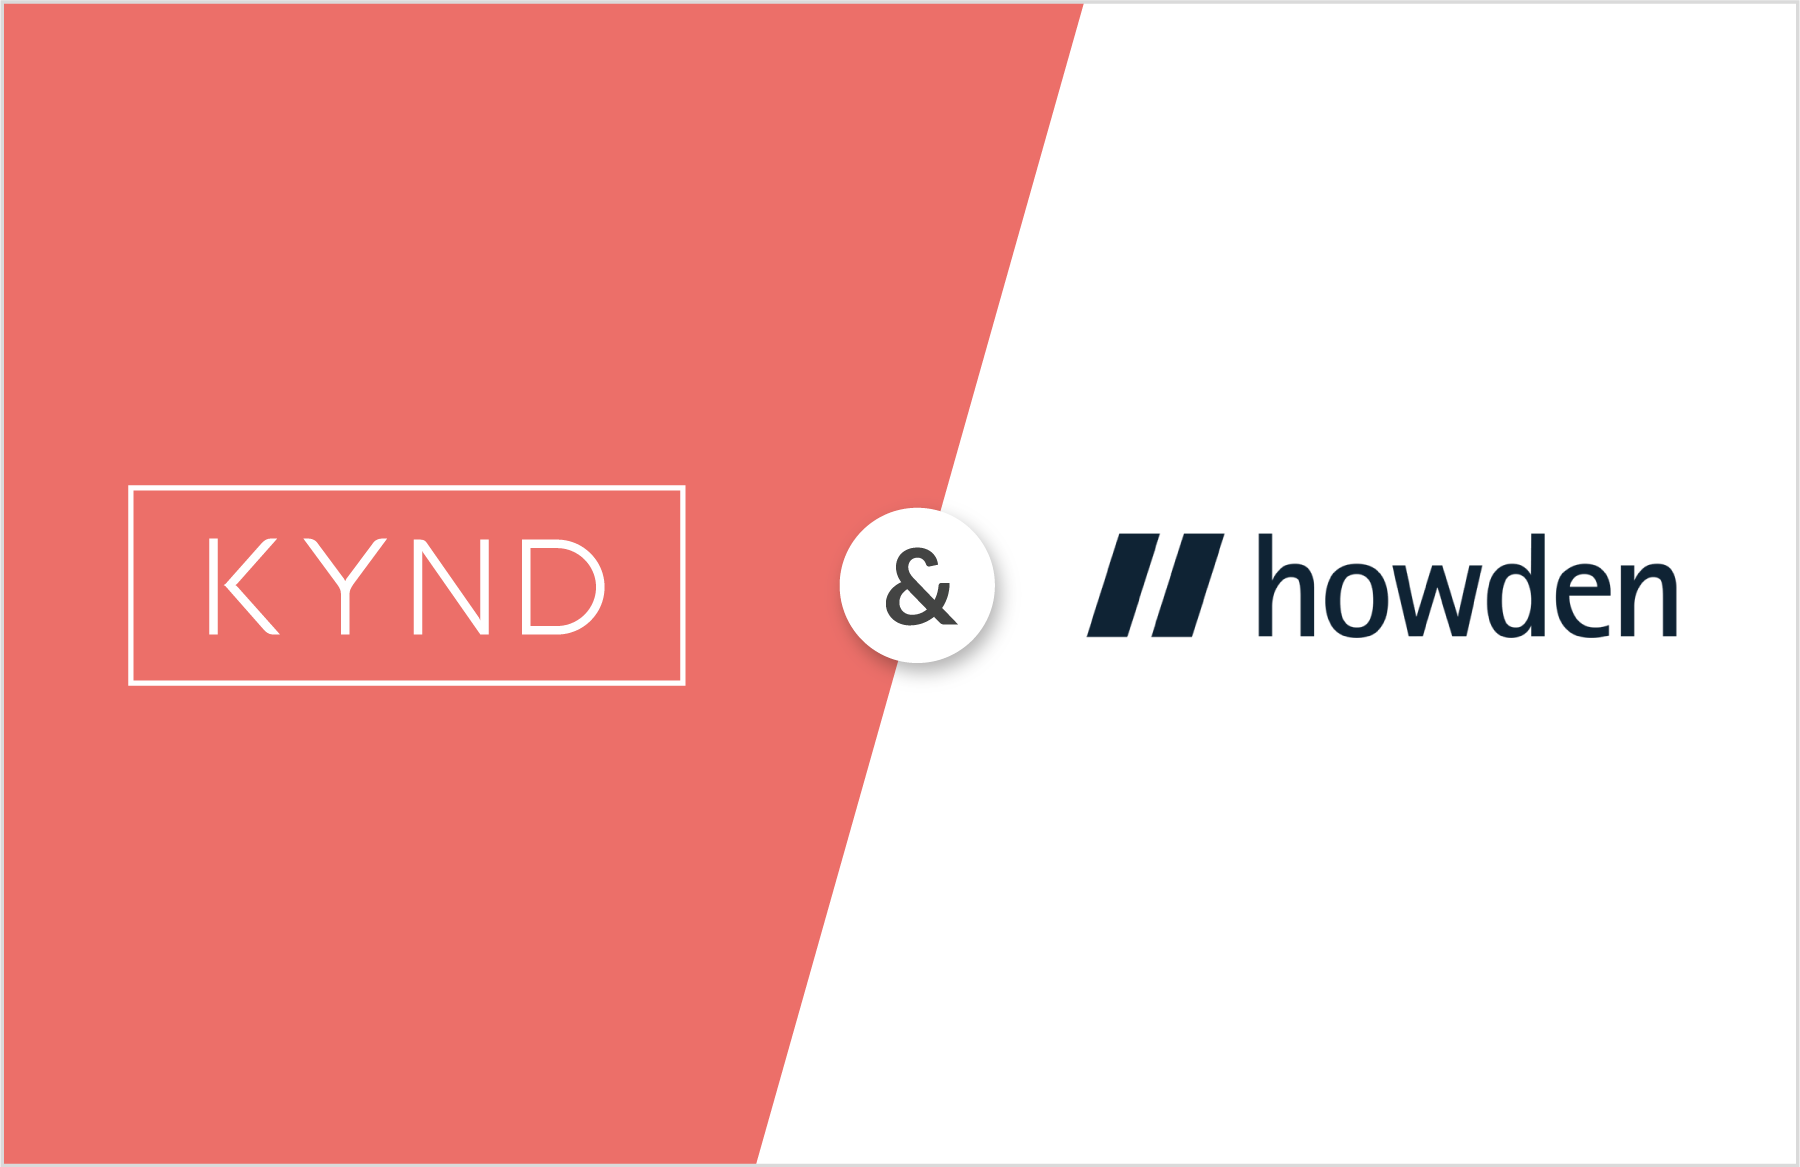 Howden extends its partnership with KYND to provide unparalleled cyber support to clients